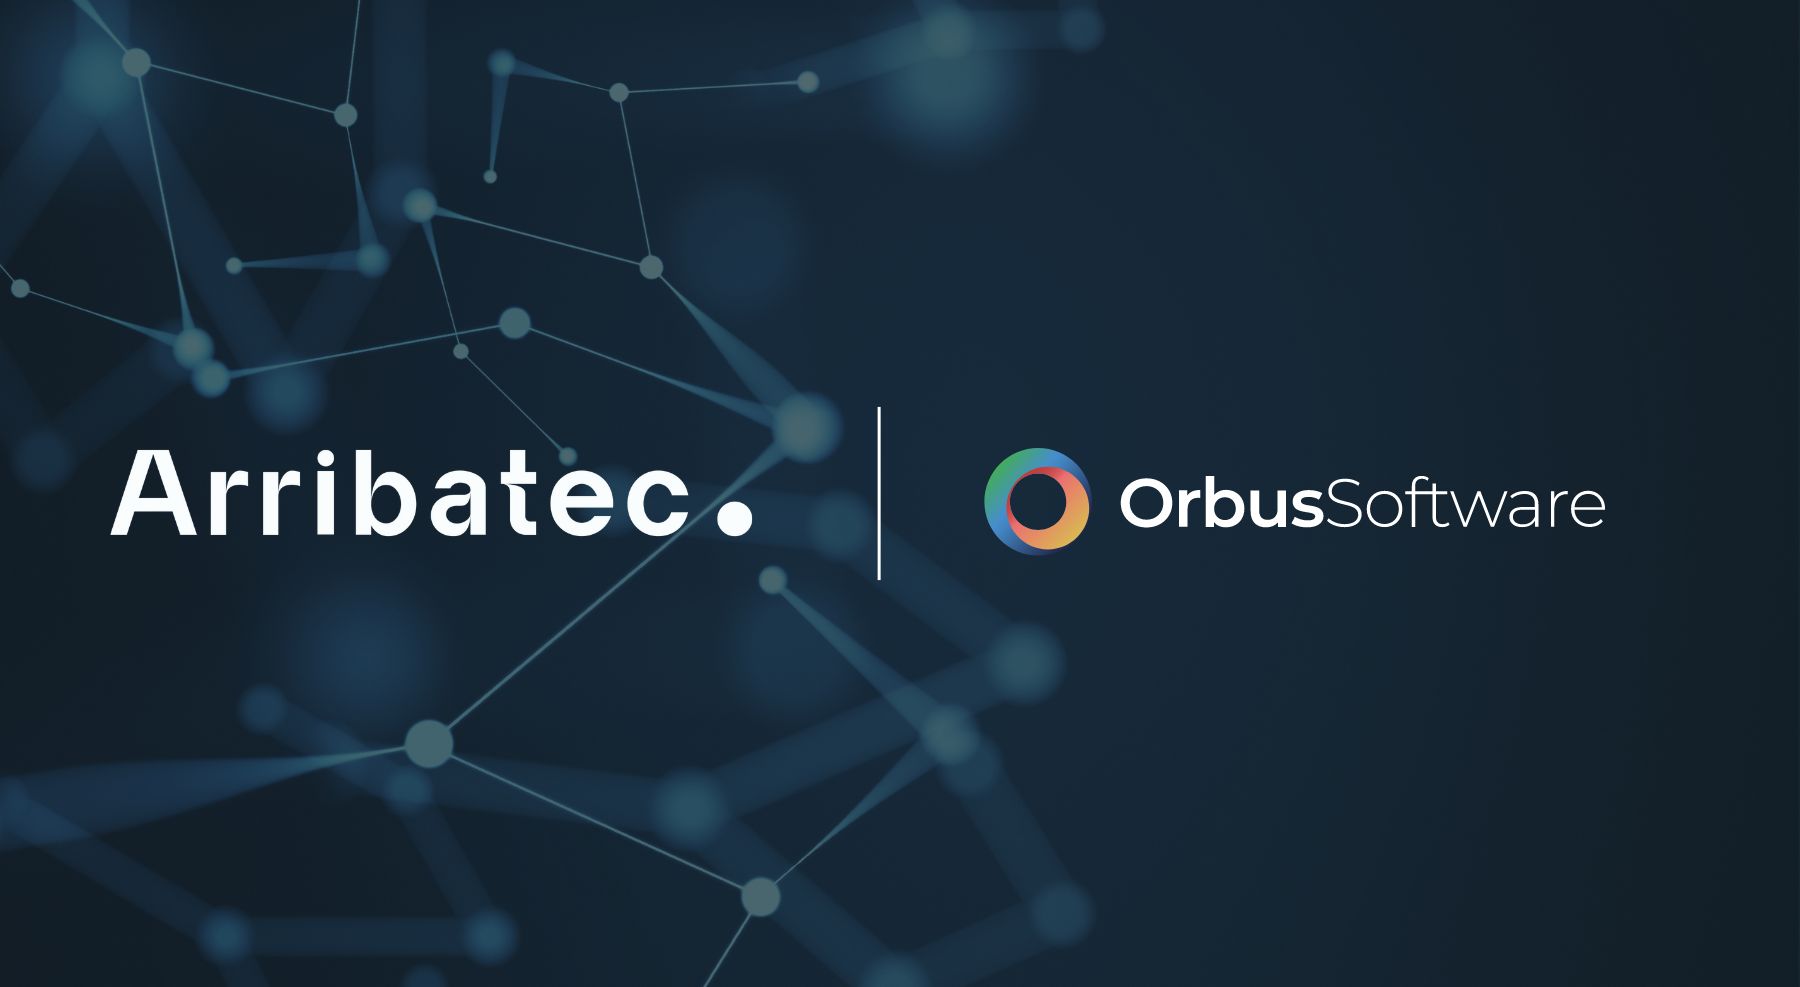 Orbus Software and Arribatec partner to accelerate sustainable transformation initiatives for global organisations